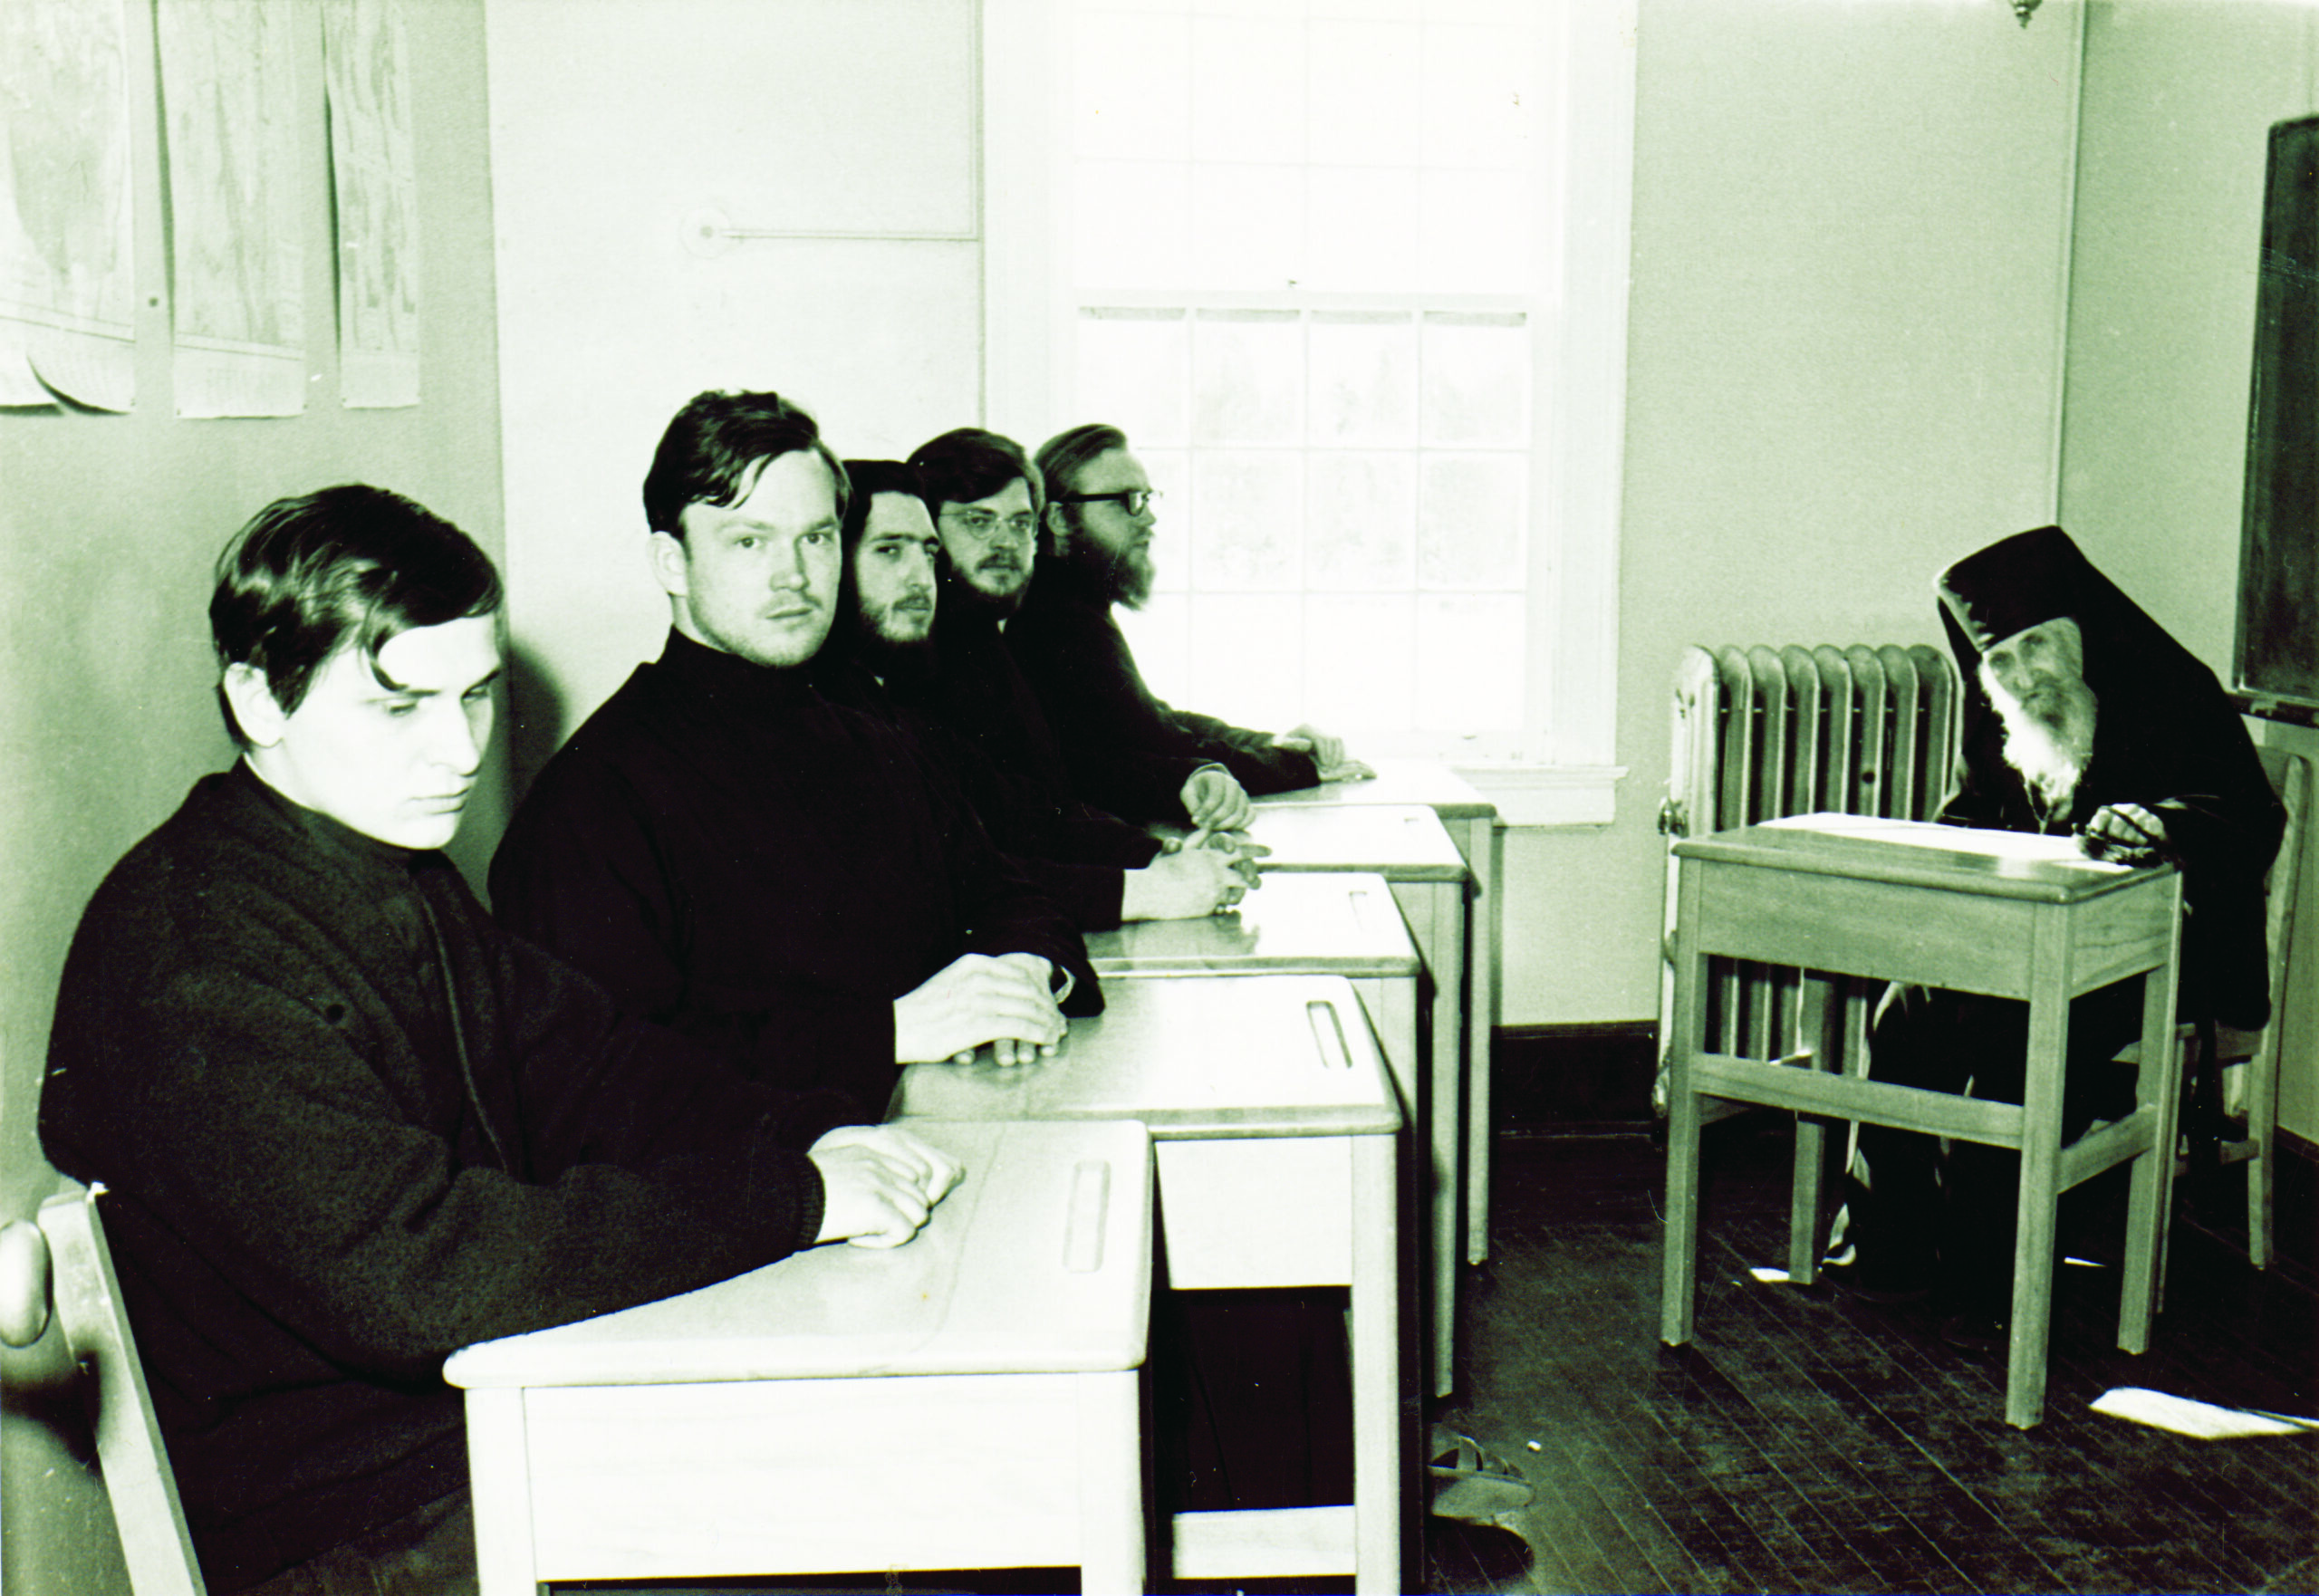 Archimandrite Constantine (1887-1975) instructing a class  at Holy Trinity Seminary in 1969. The future Metropolitan Hilarion is seated next to the window.